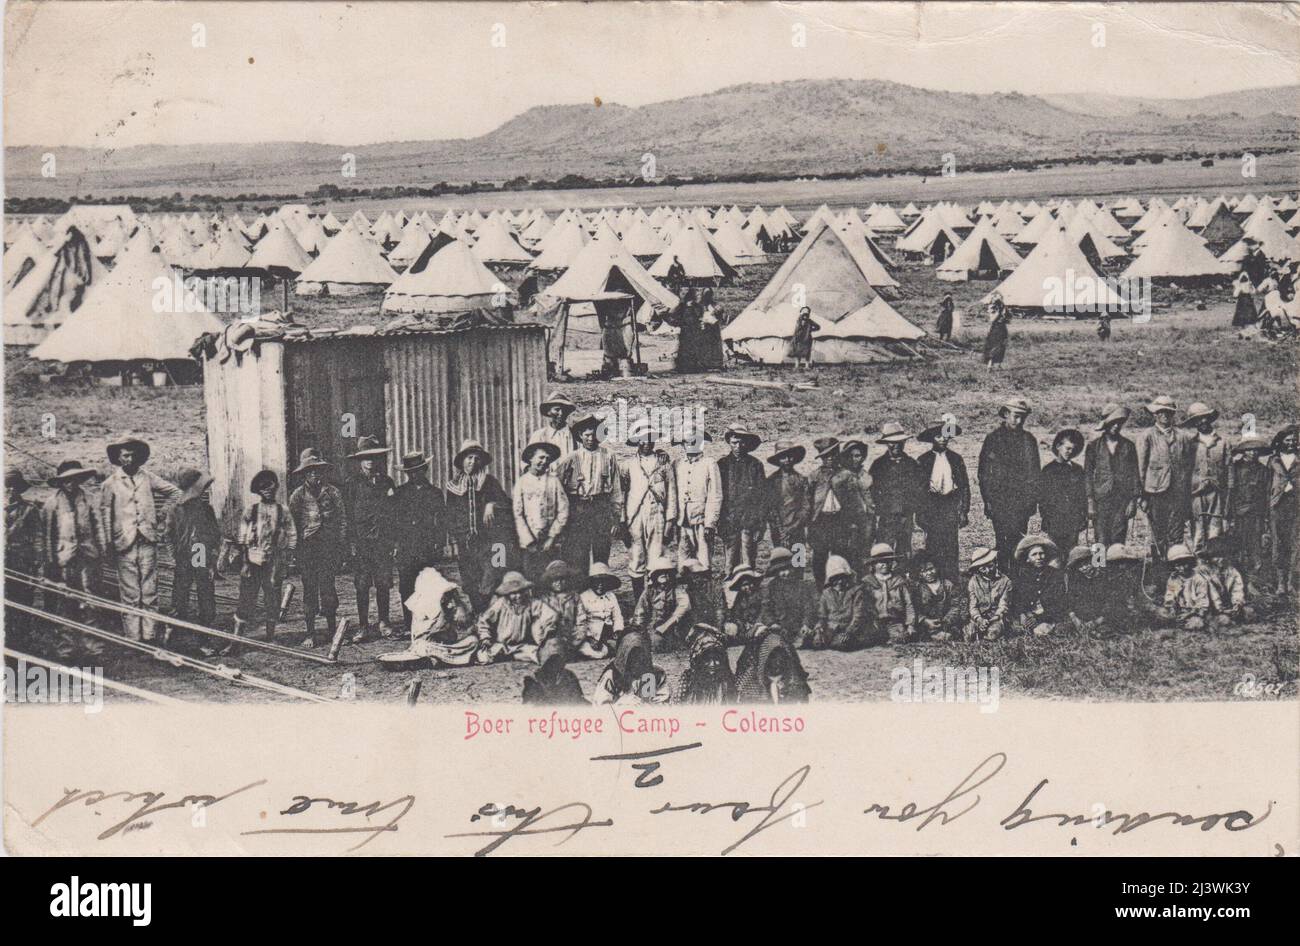 "Boer refugee camp, Colenso", 1902: postcard showing a concentration camp at Colenso during the Anglo-Boer War. Bell tents can be seen in the background and a group of children are looking towards the photographer in the foreground Stock Photo